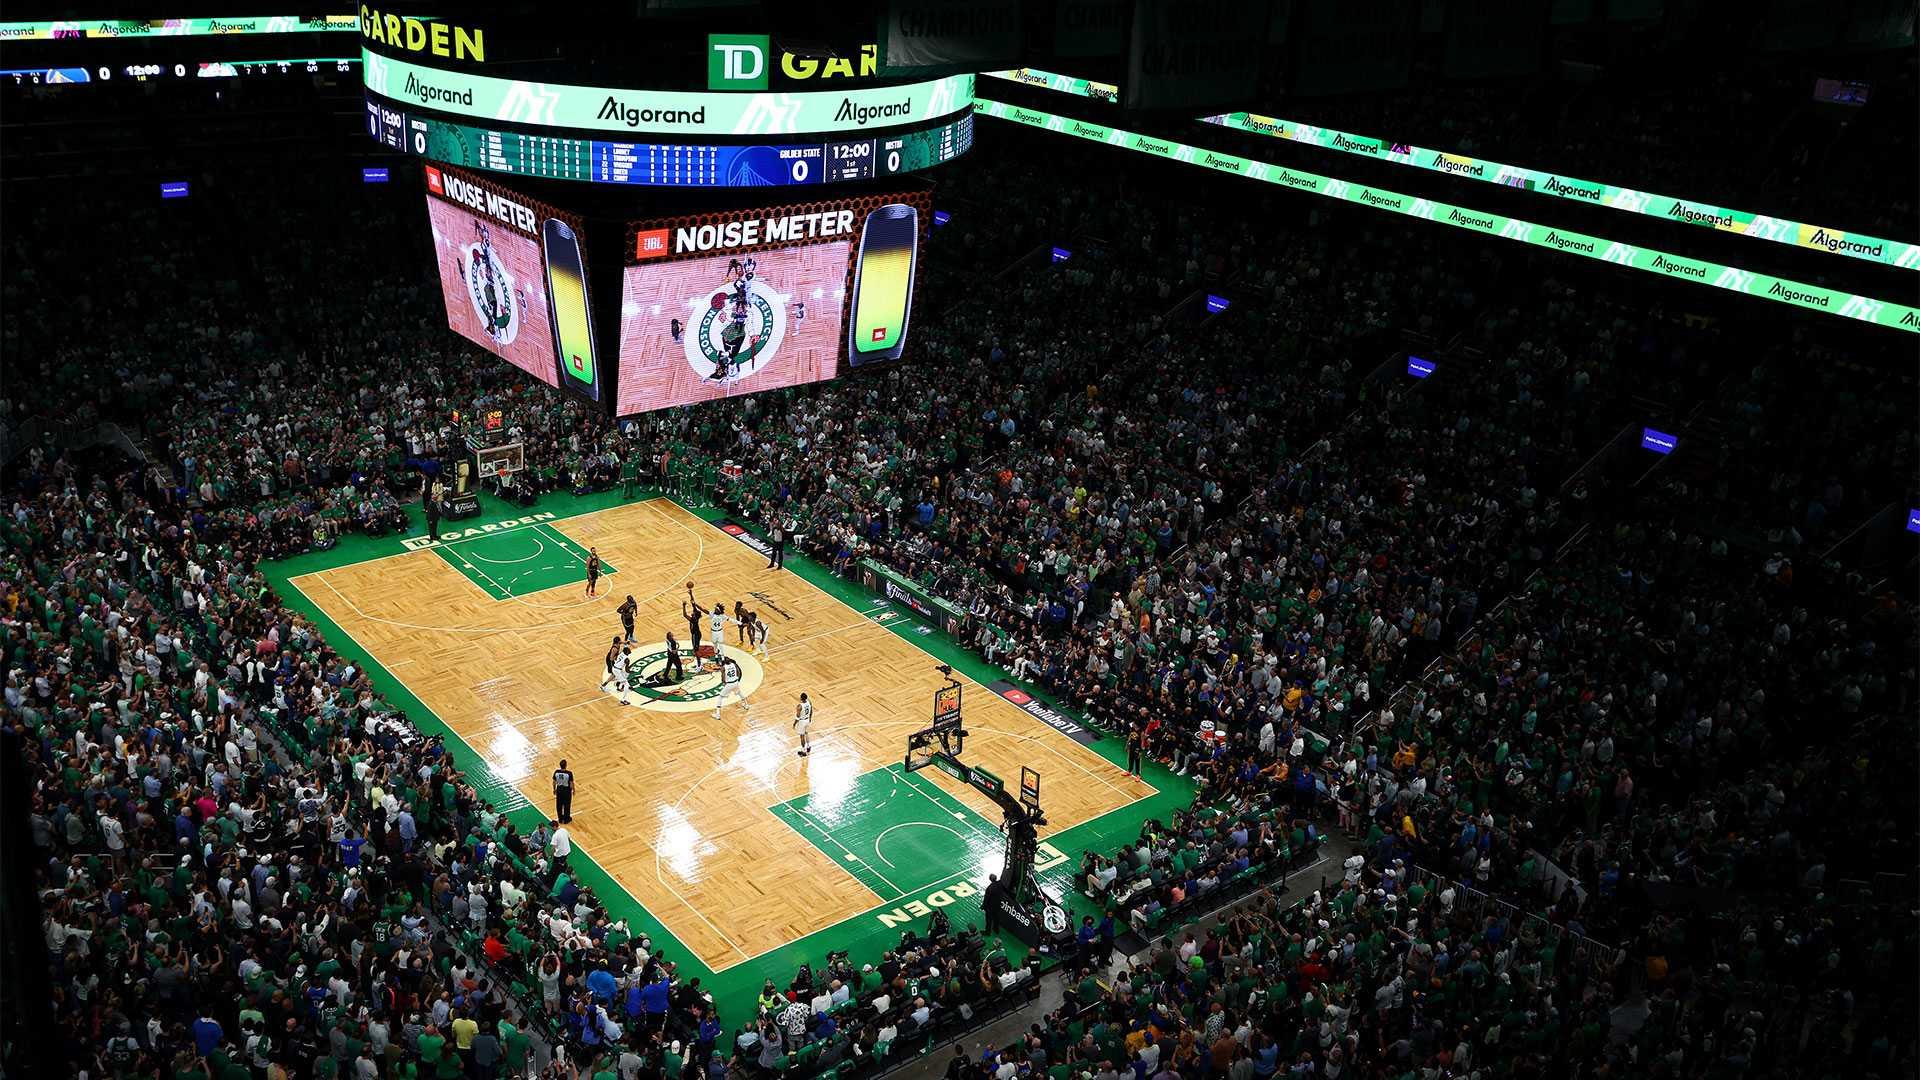 NBA Eastern Conference Finals: TBD at Boston Celtics (Home Game 1) (Date TBD) (If Necessary)